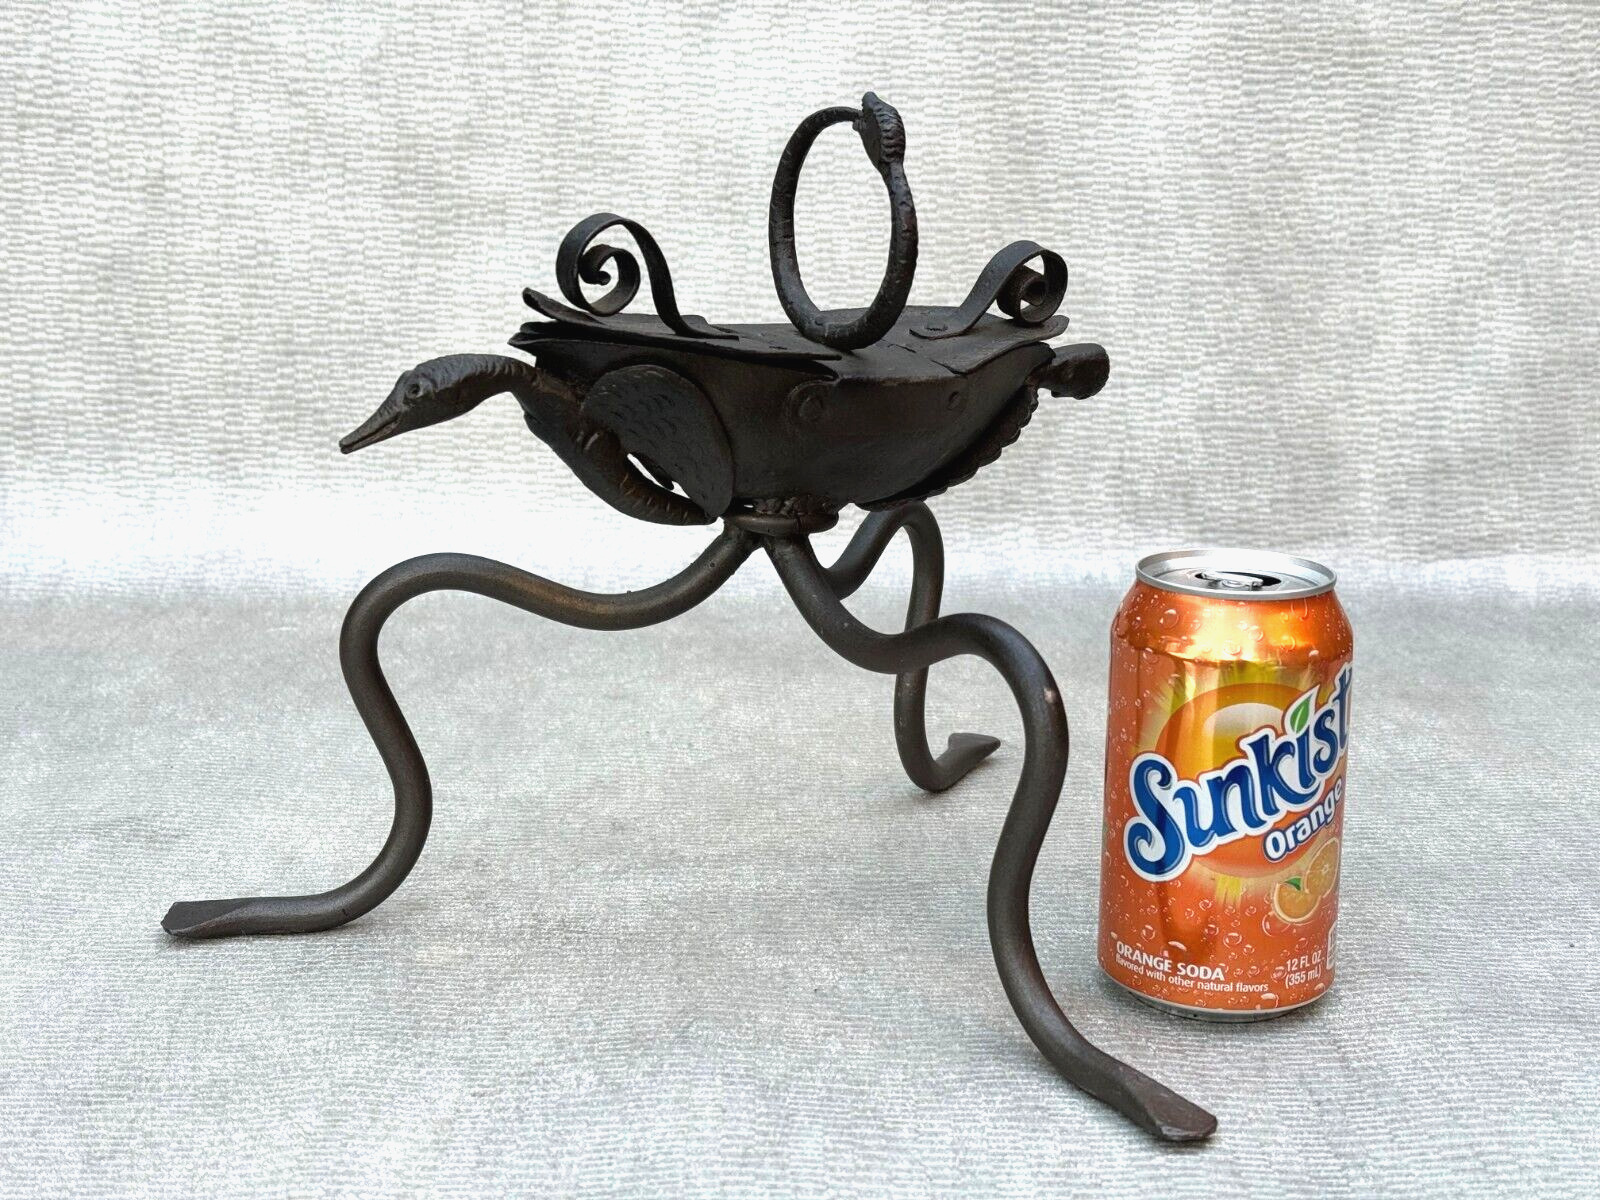 ANTIQUE EXOTIC ASHTRAY SURREAL CREATURE WELDED METAL WROUGHT IRON SCULPTURE ART